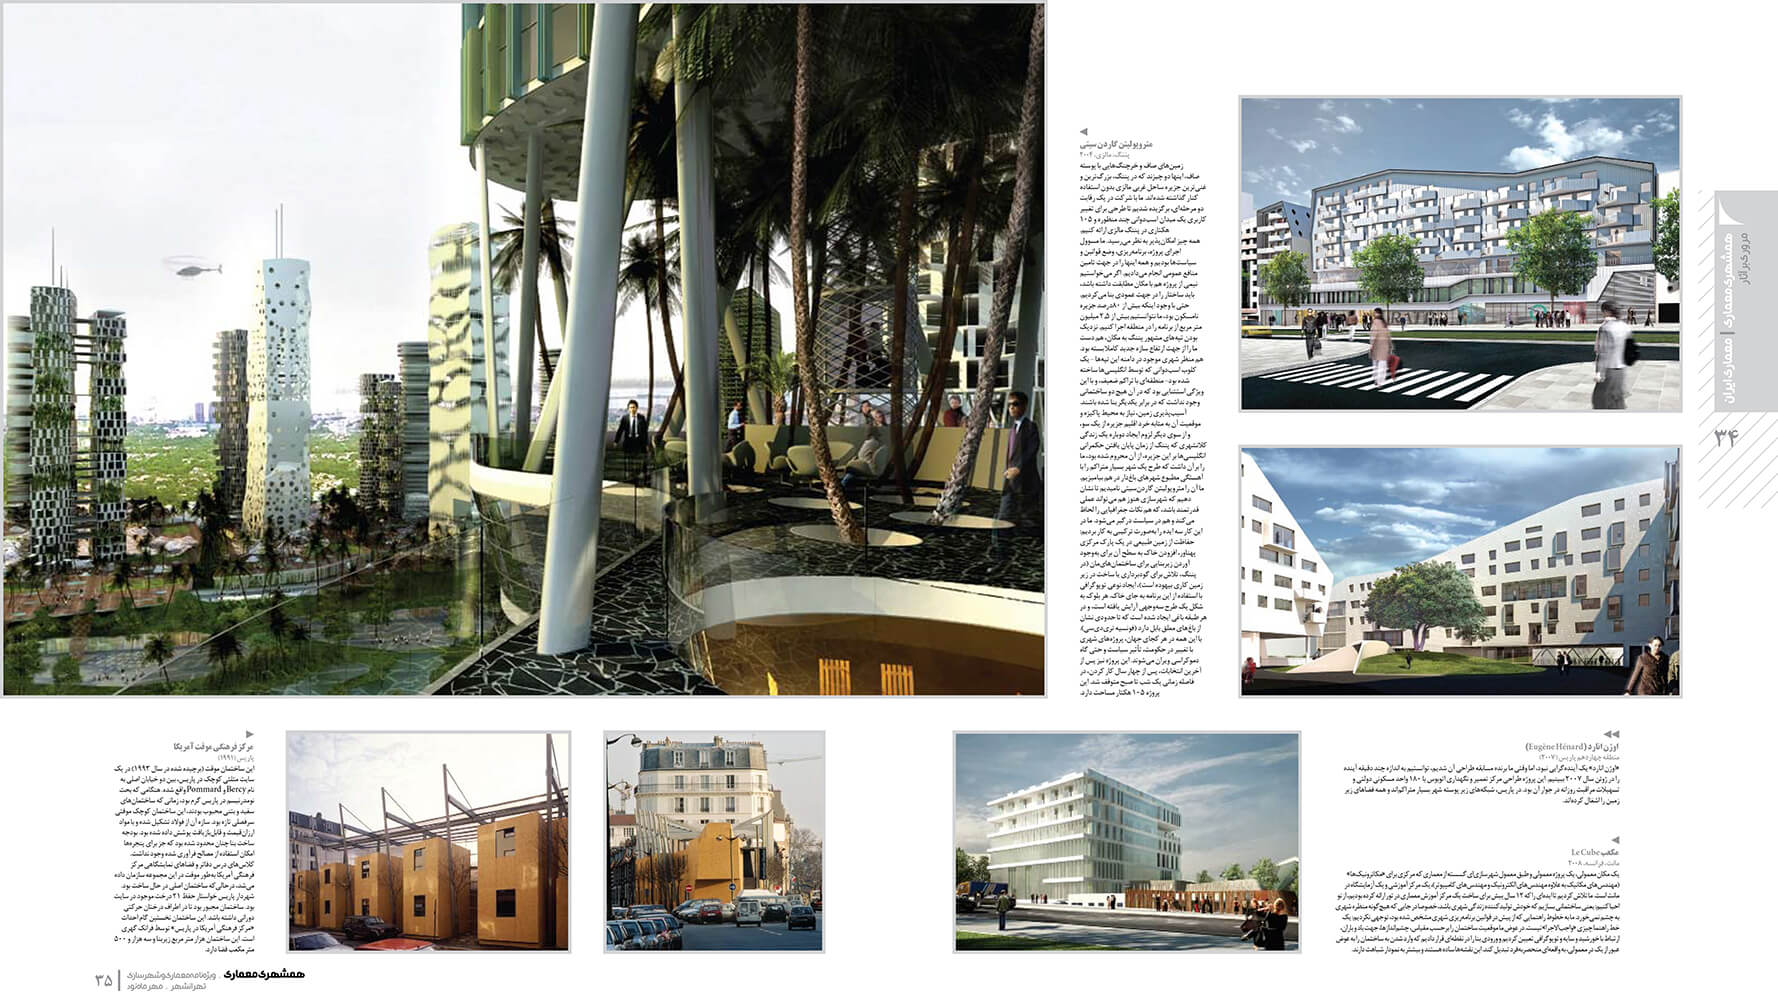 picture no. 4 of publication: Architecture and Questioning, author: Kambiz Moshtaq